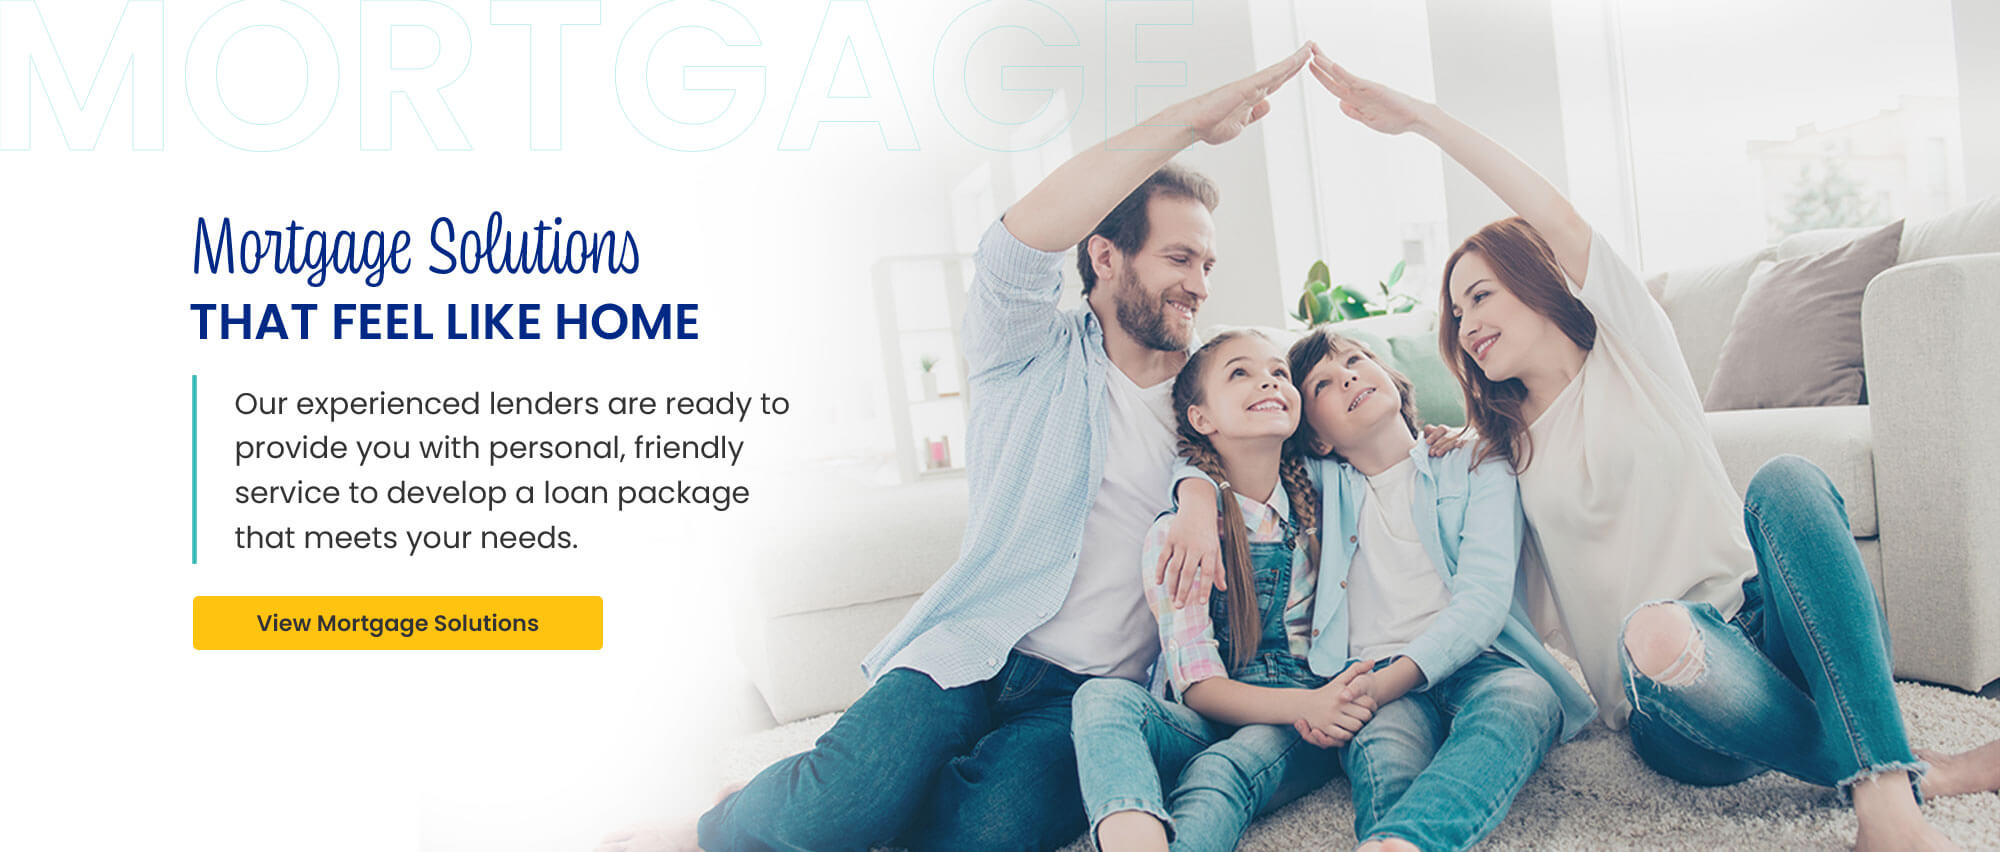 Mortgage Solutions That Feel Like Home. Our experienced lenders are ready to provide you with personal, friendly service to develop a loan package that meets your needs. View Mortgage Solutions.